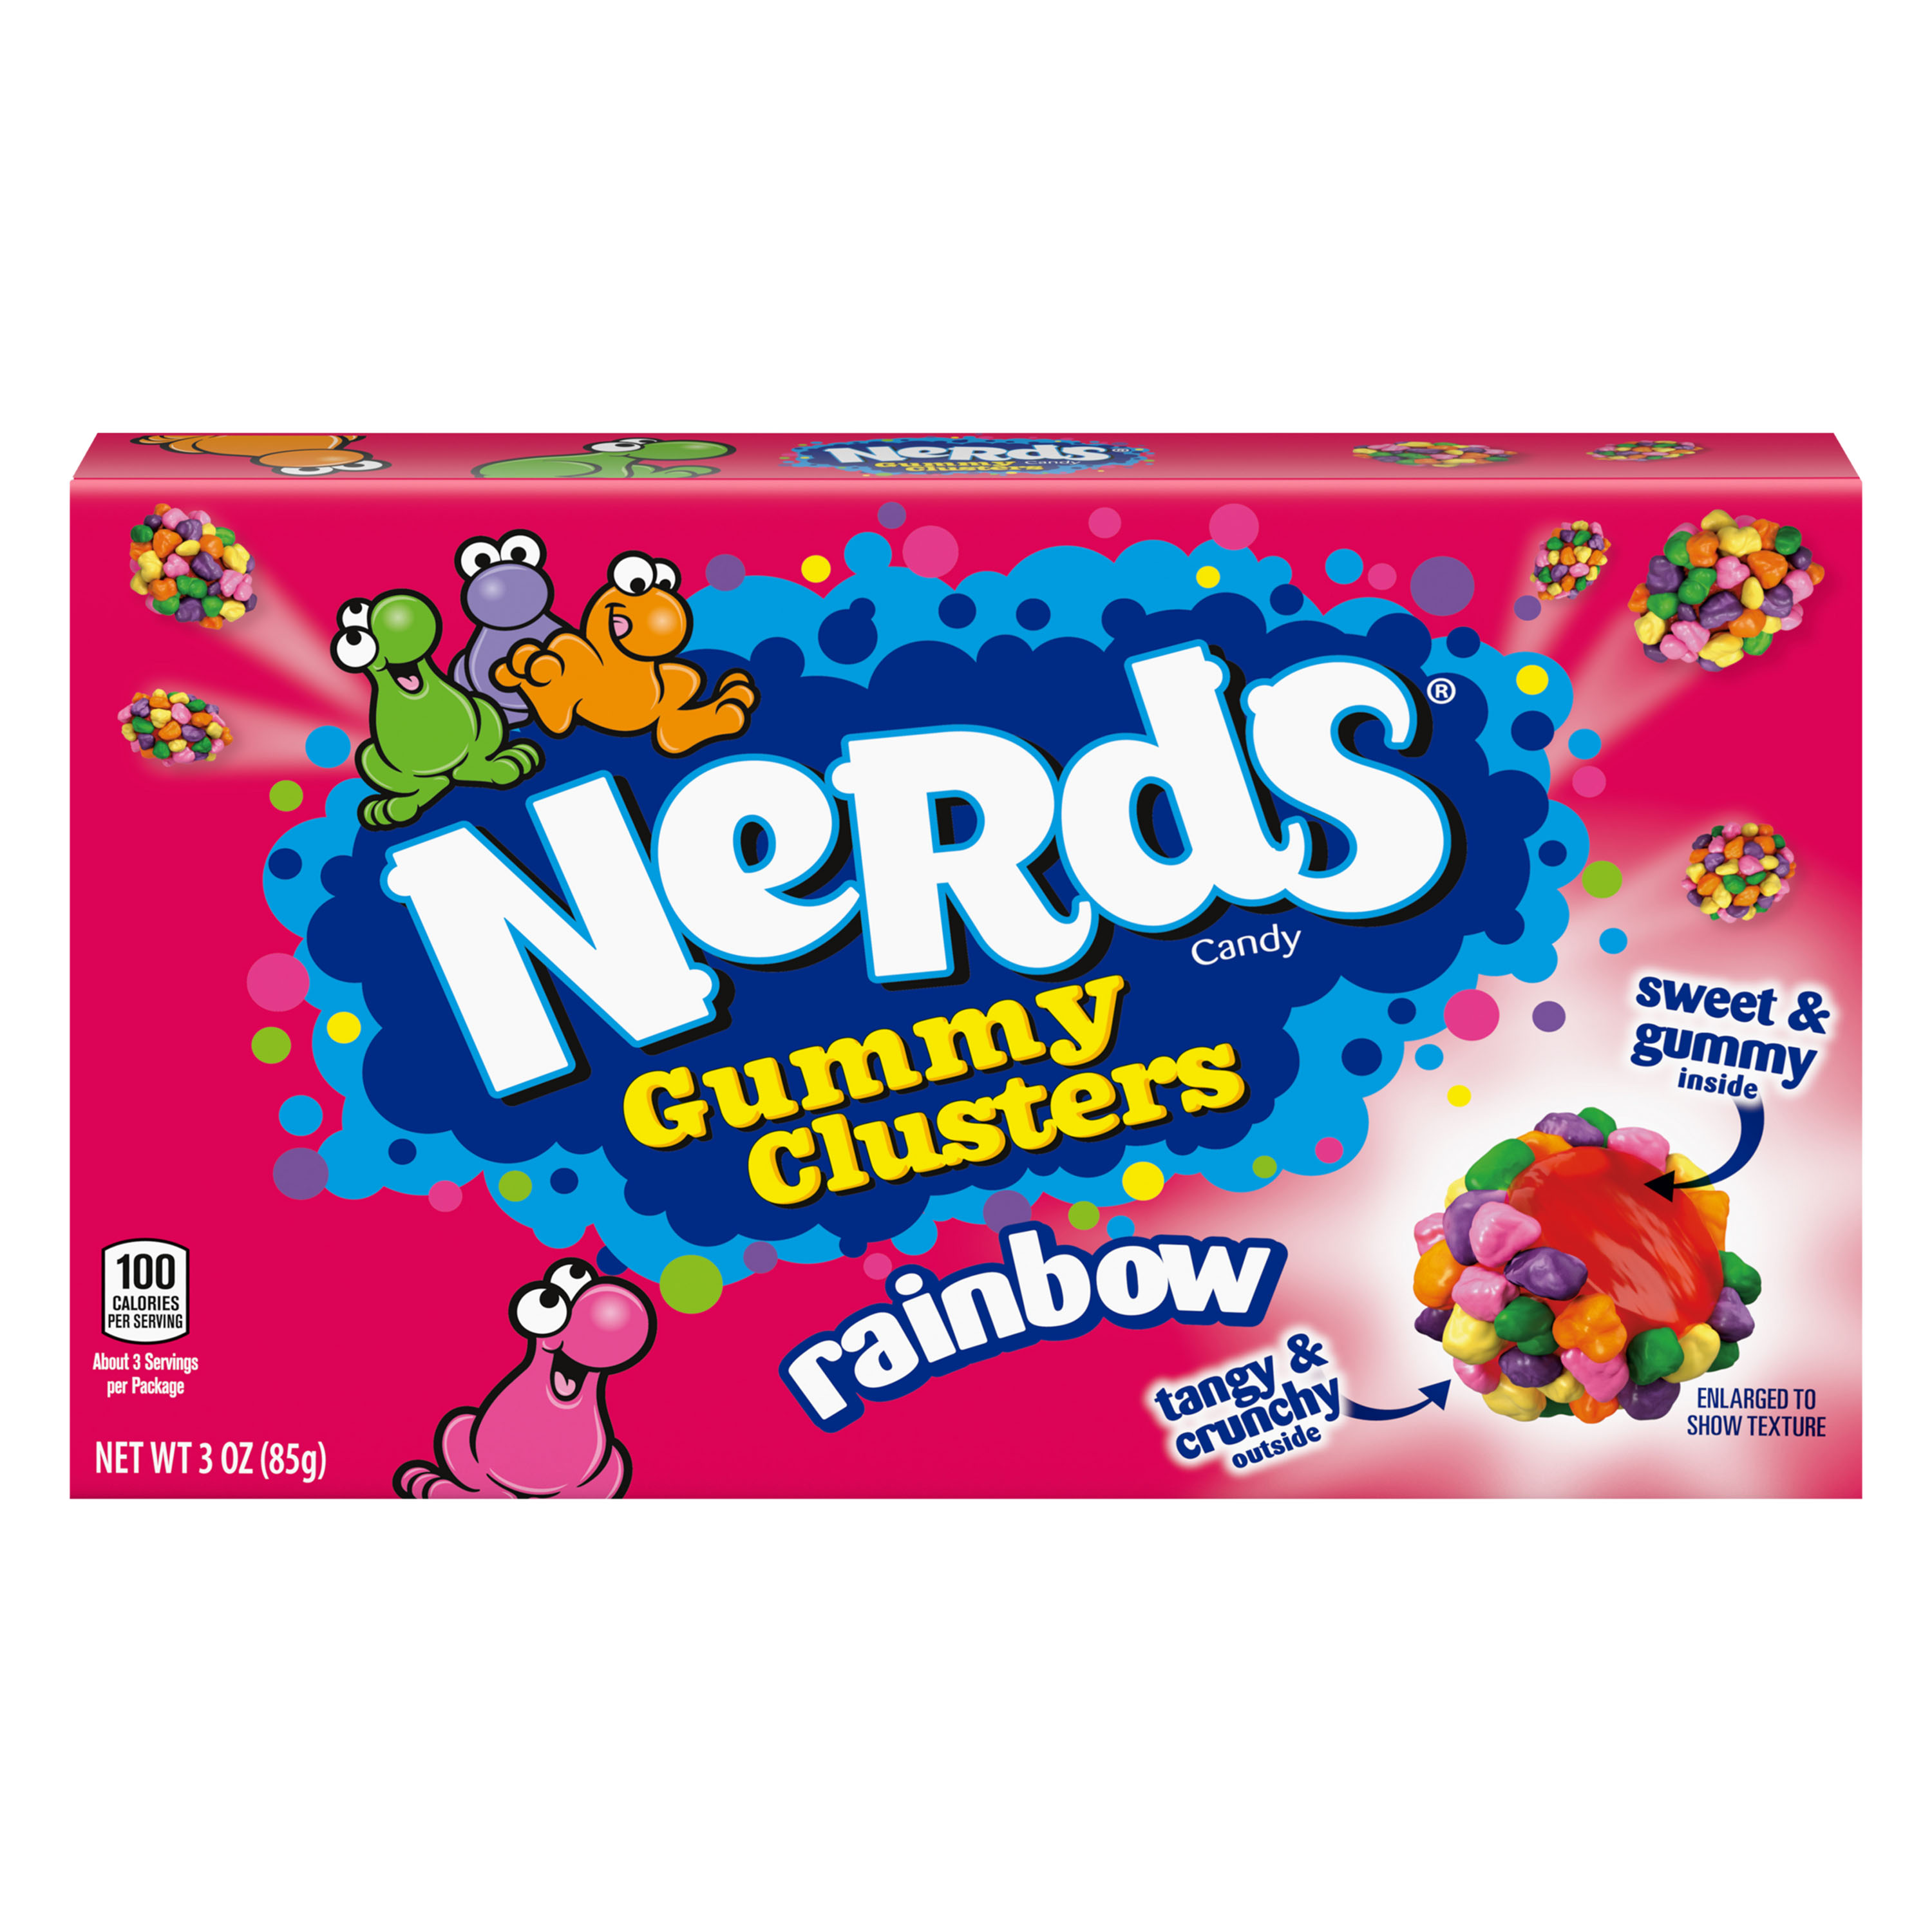 Nerds Gummy Clusters Candy, Rainbow, 3 oz Theater Box - image 1 of 9